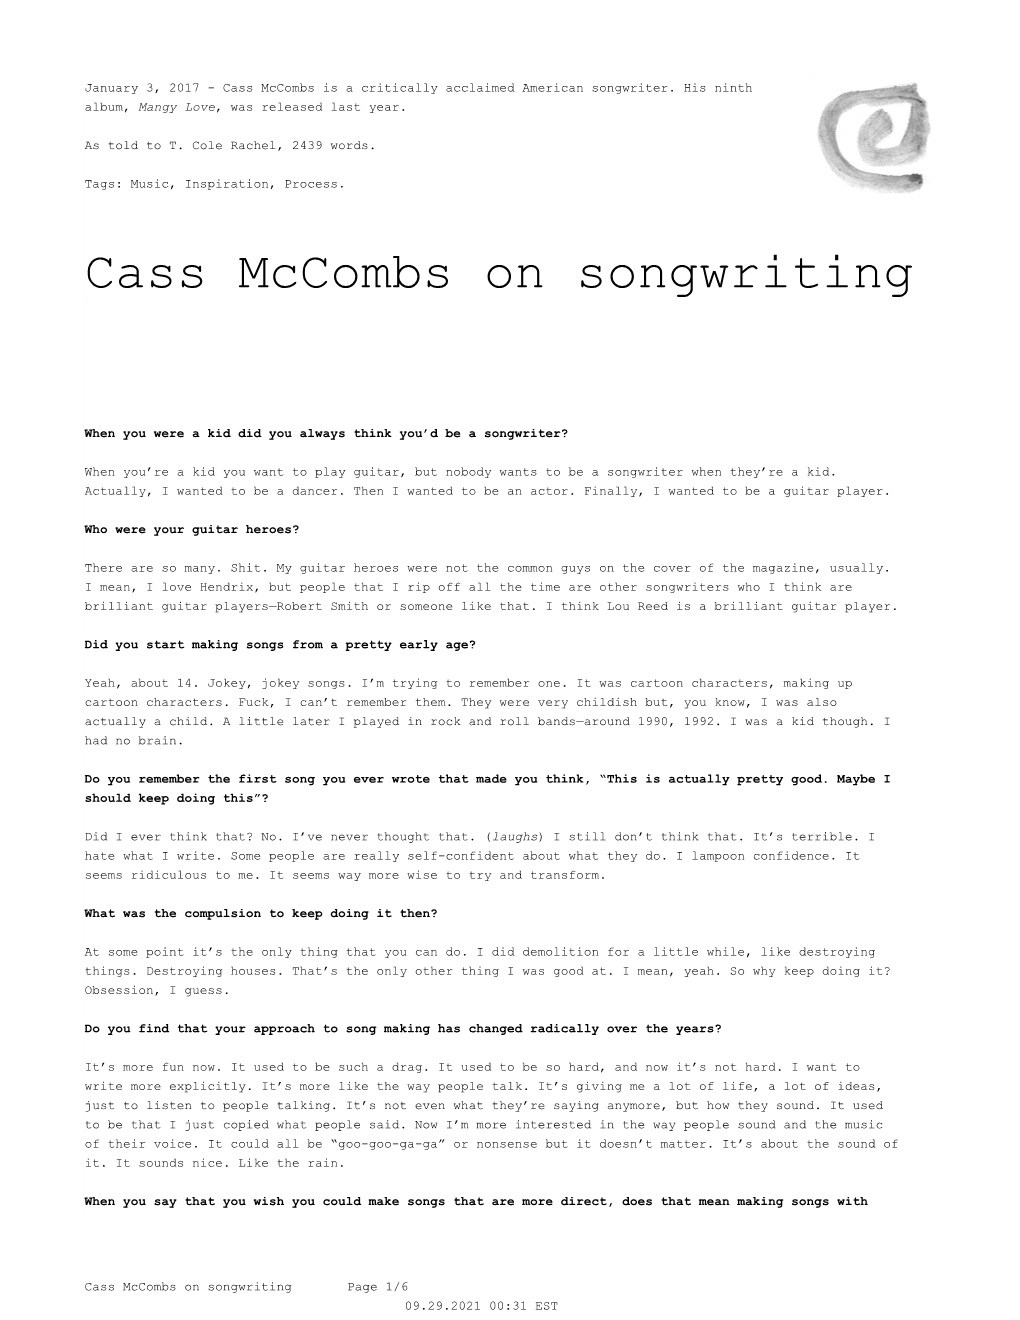 Cass Mccombs on Songwriting